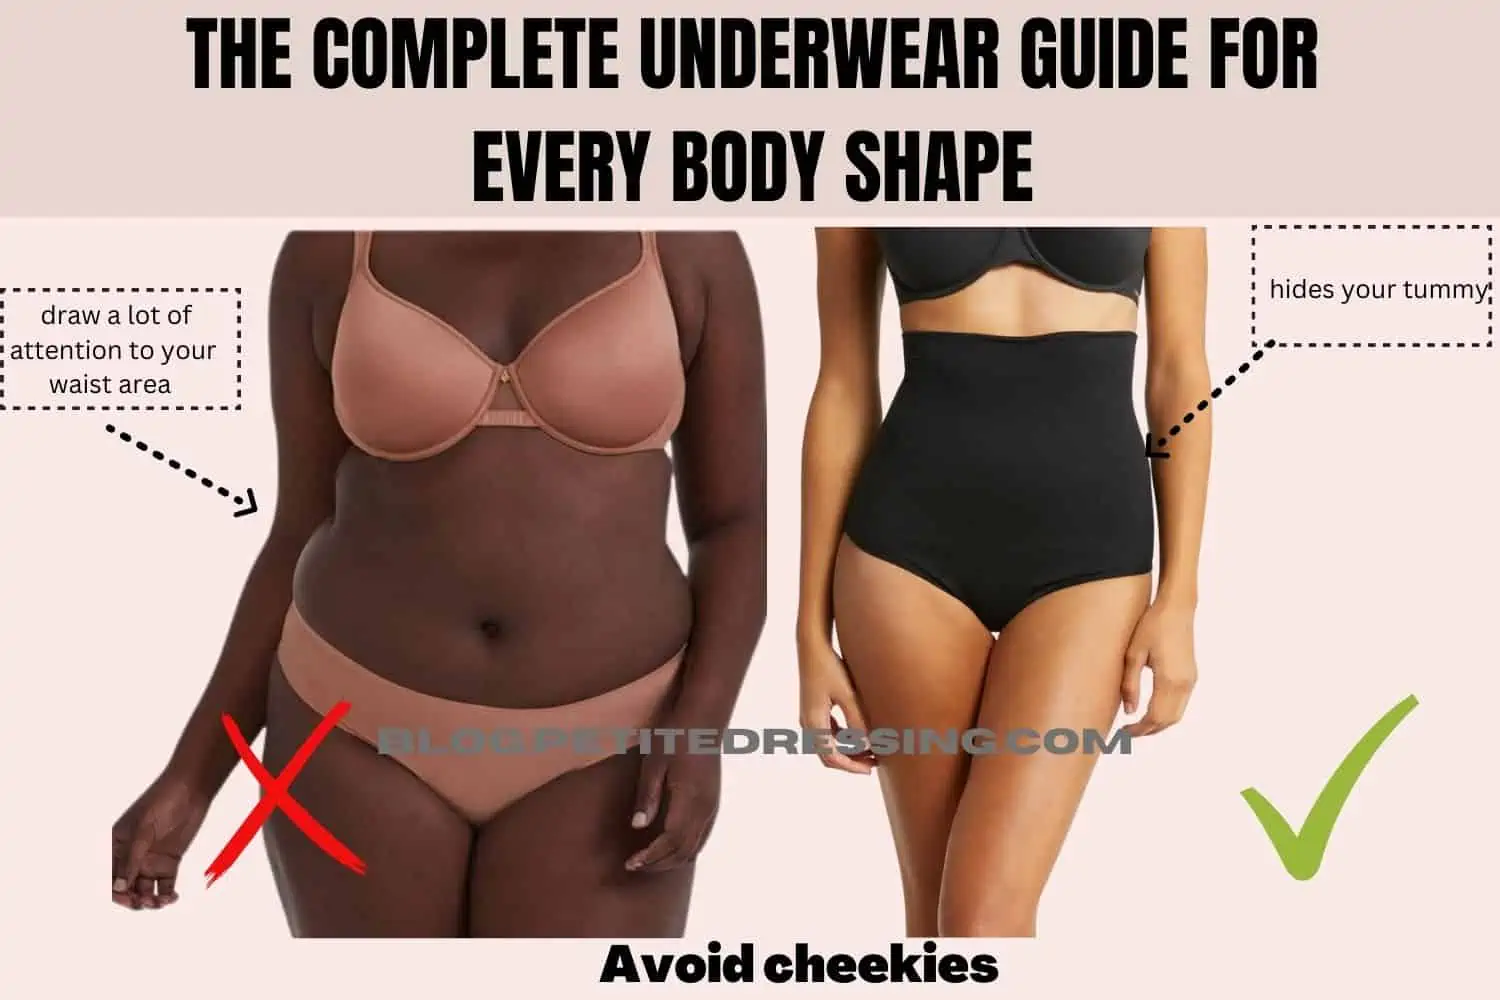 Trying shaping underwear on my midsize, apple shape body. Have you tri